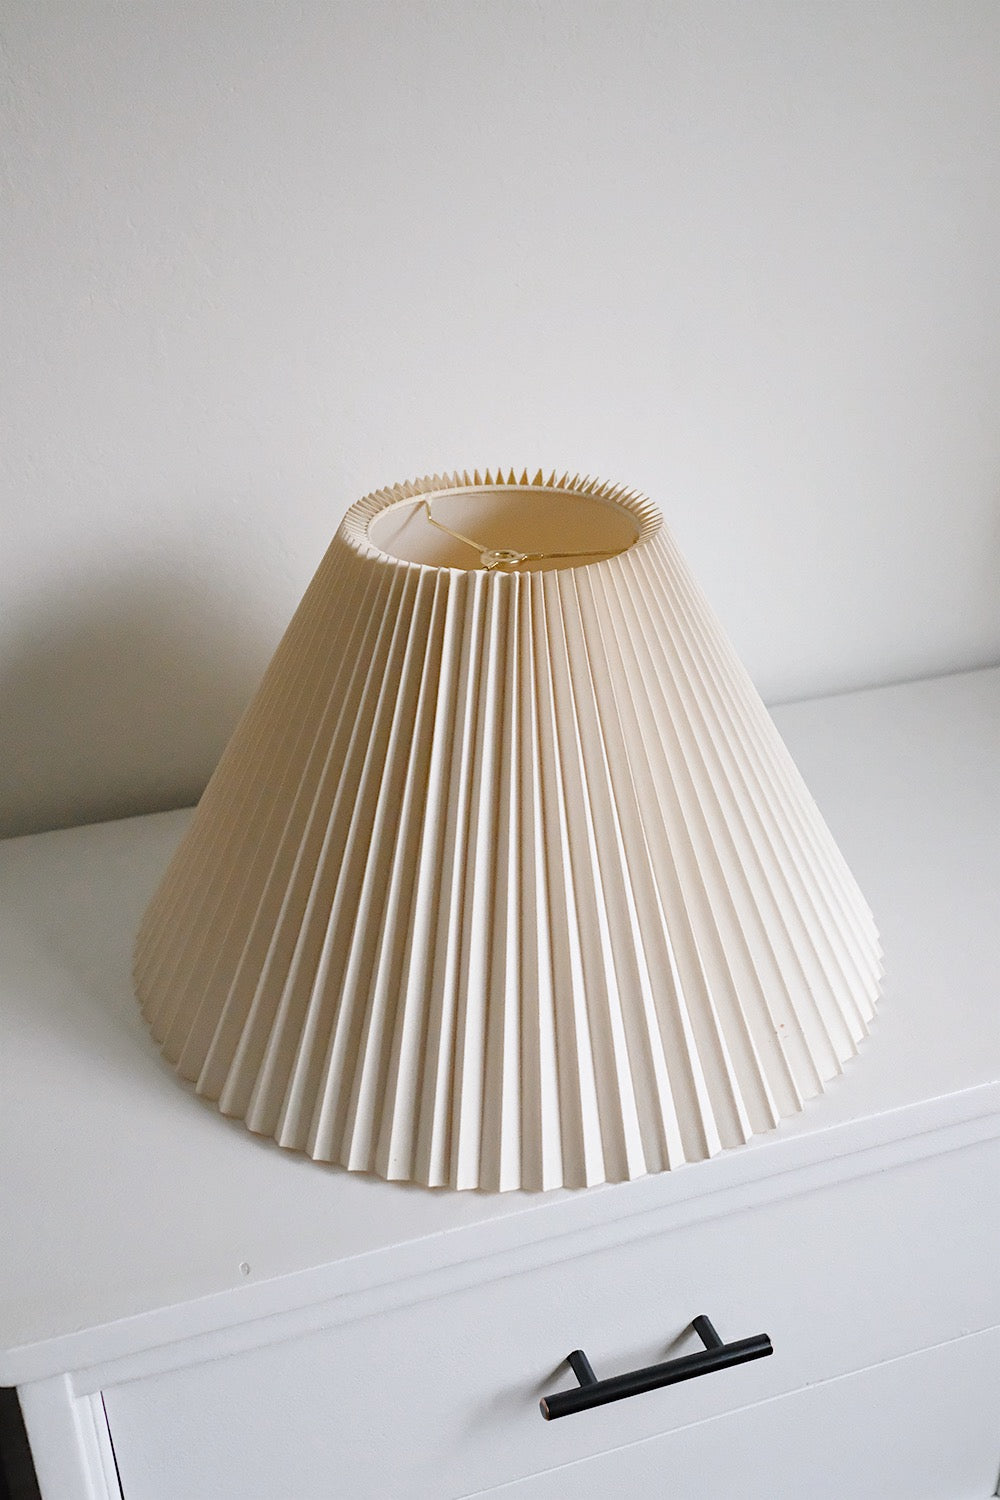 pleated lampshade